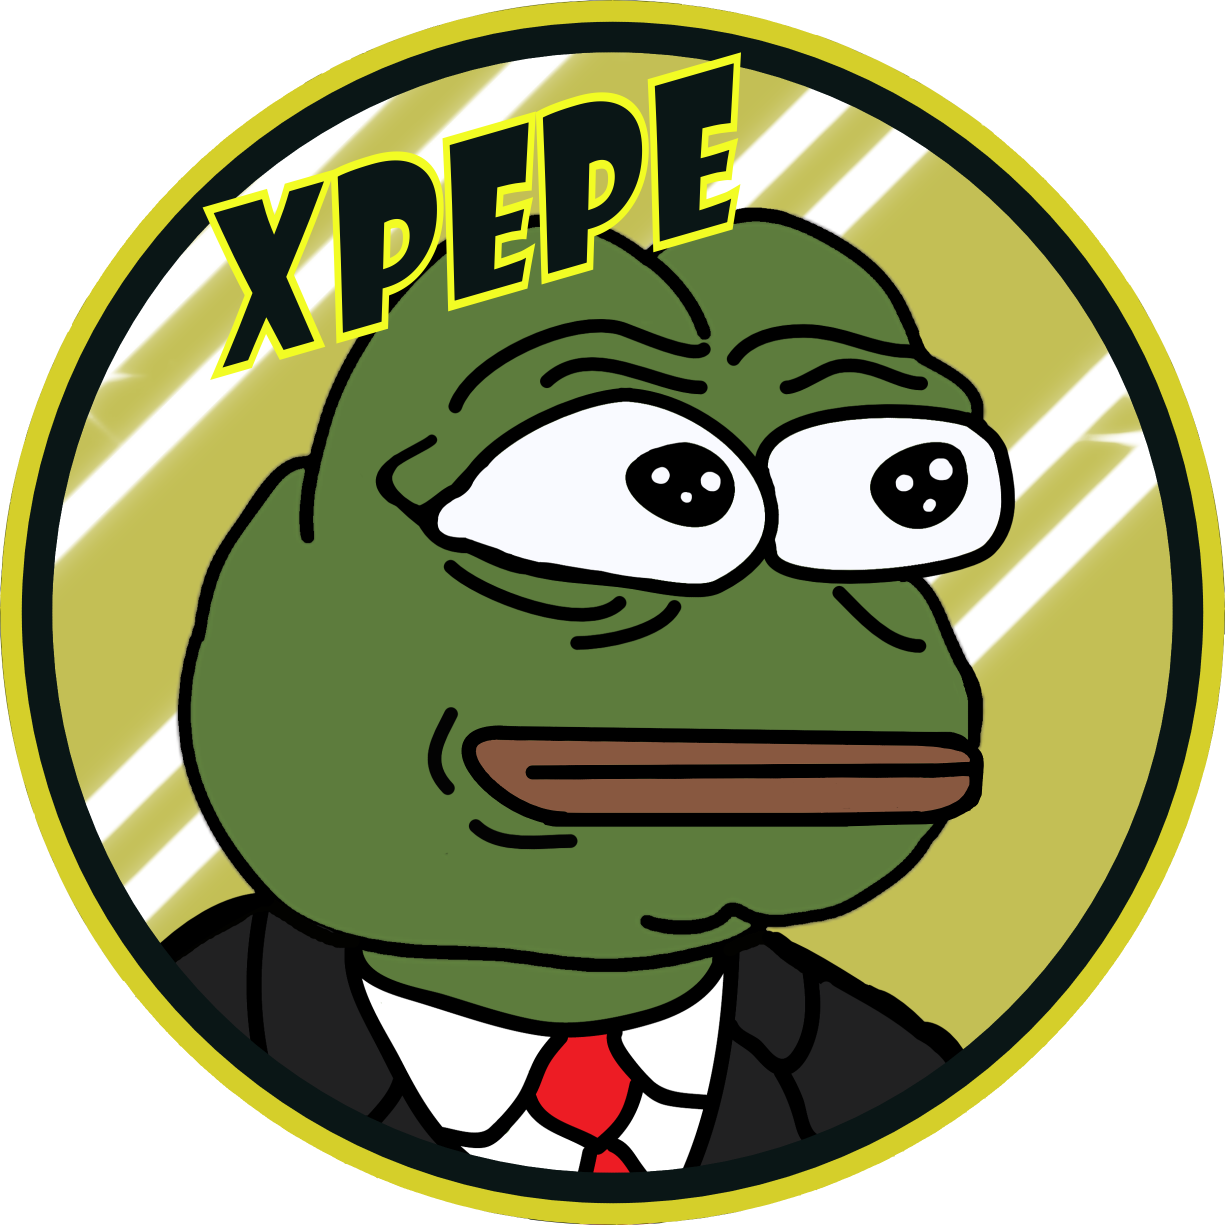 Xpepe pepe xrpl xrp crypto coin Blank Meme Template